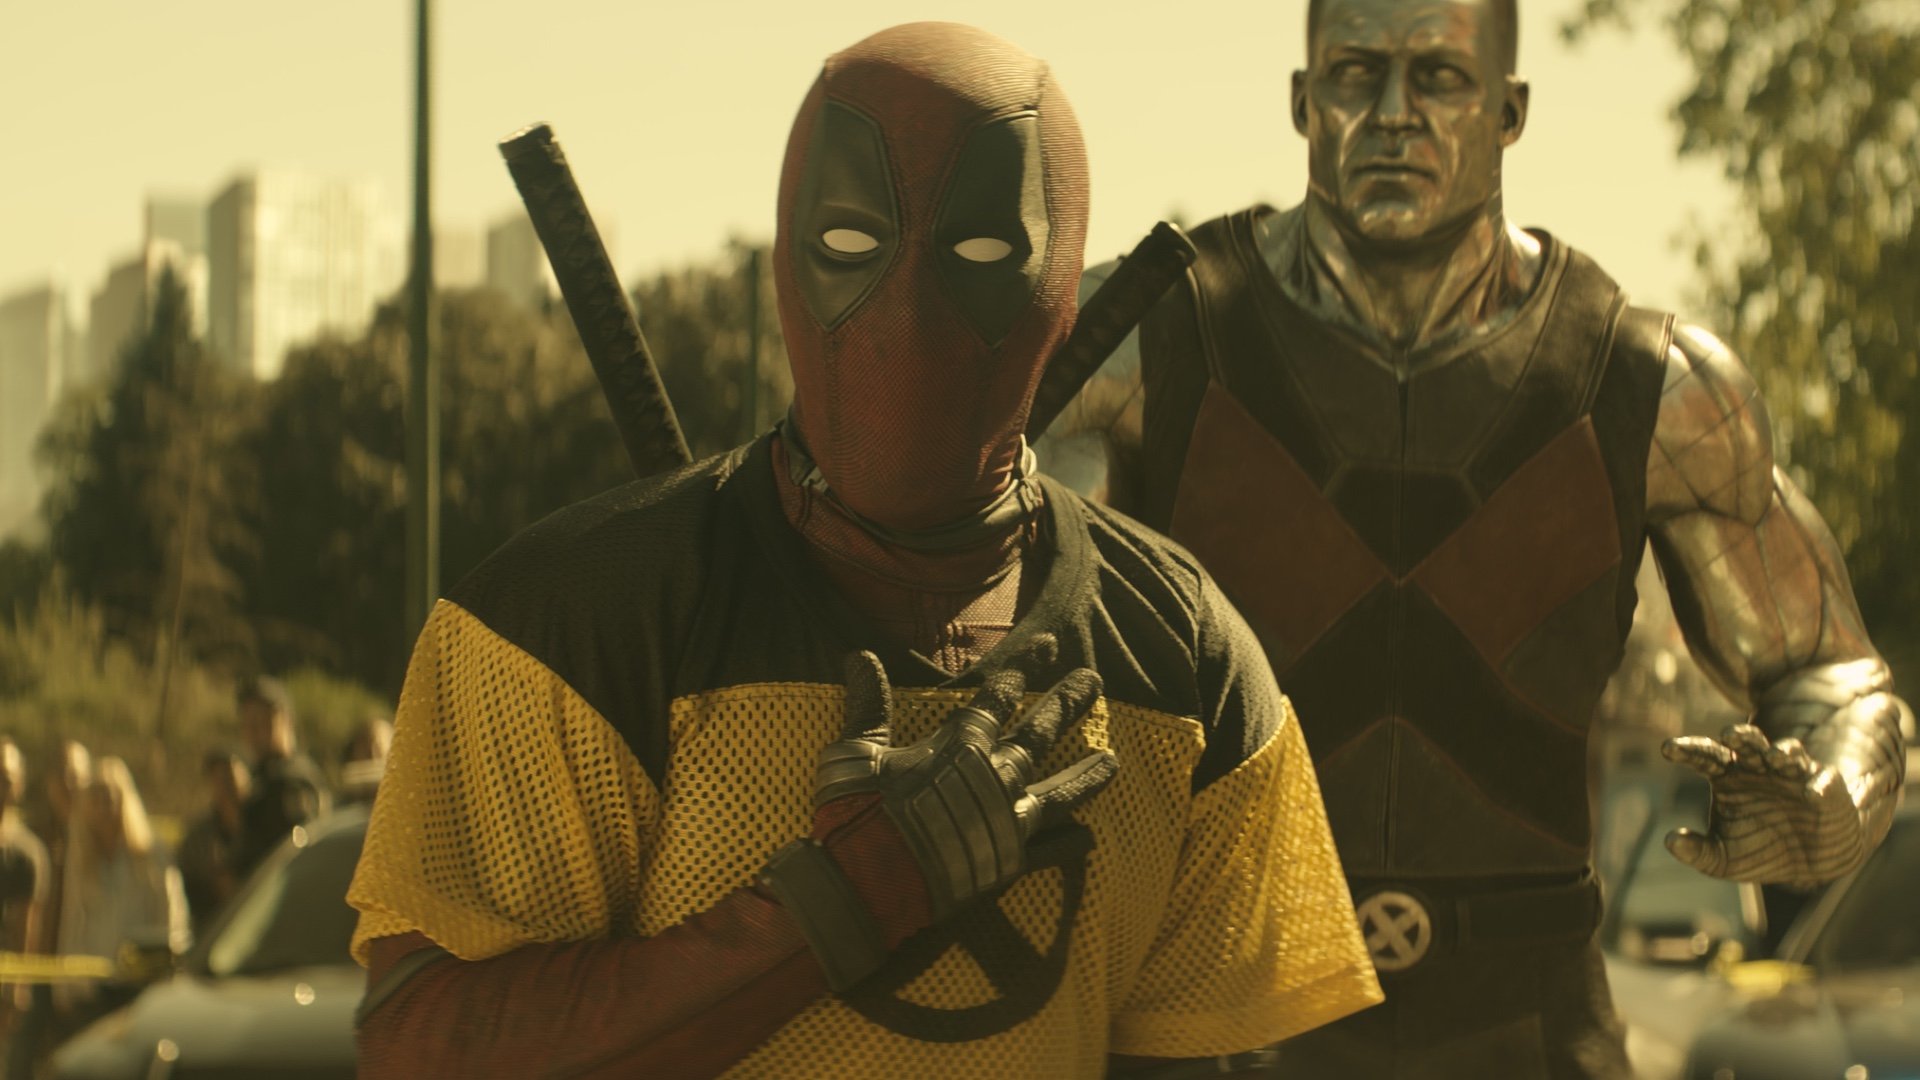 Ryan Reynolds Wants You to Stop Spoiling 'Deadpool 3